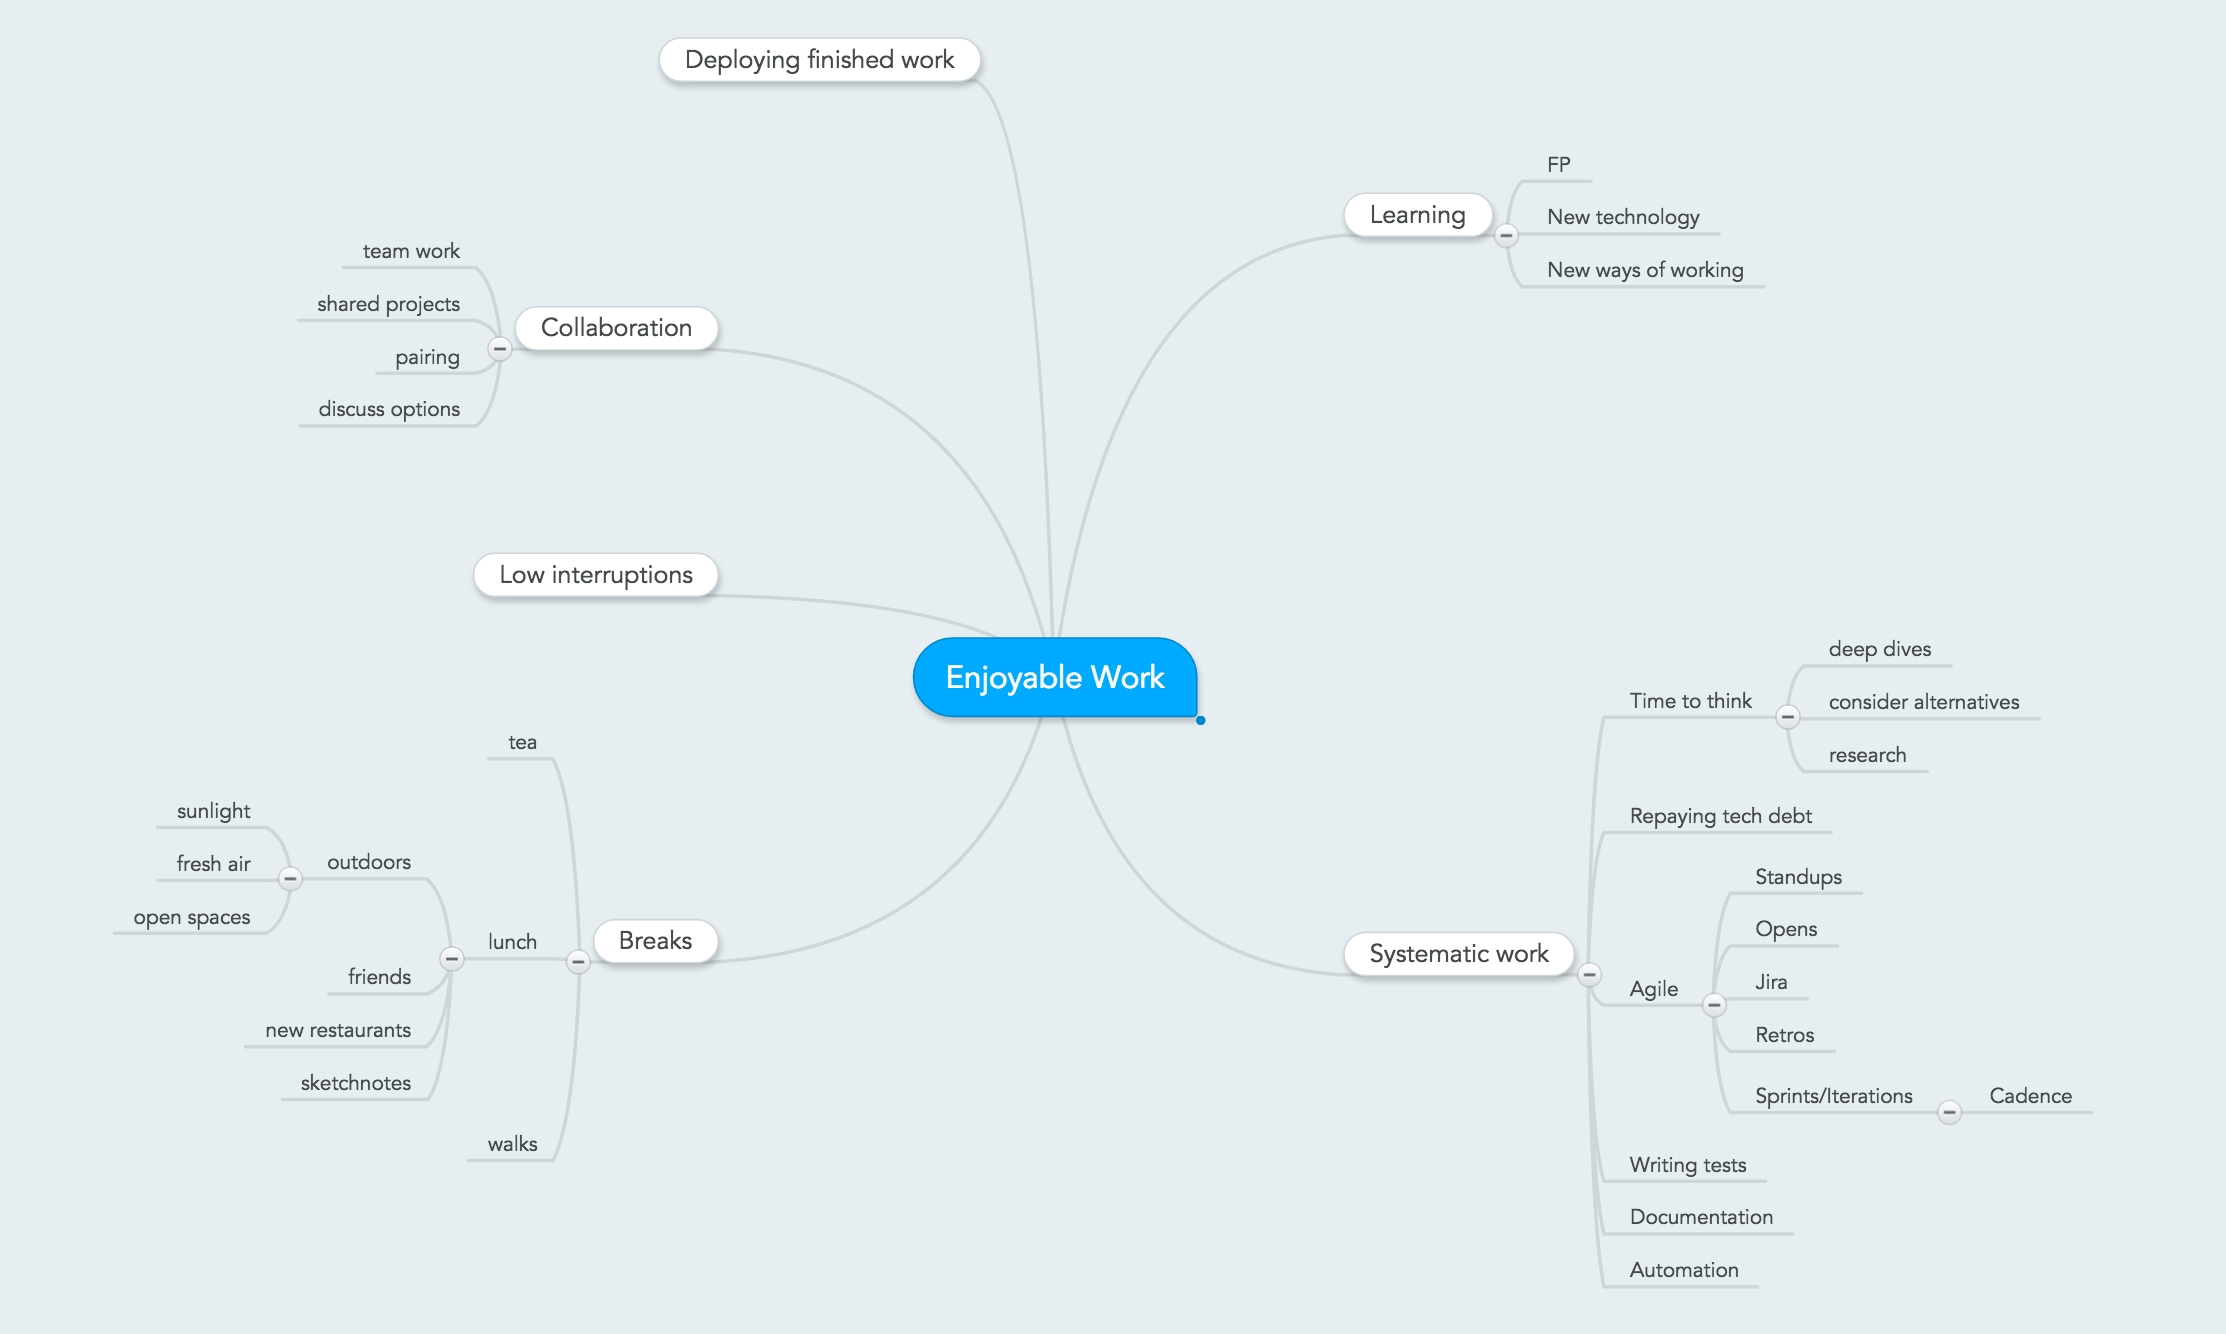 Mind map of what I find enjoyable about work